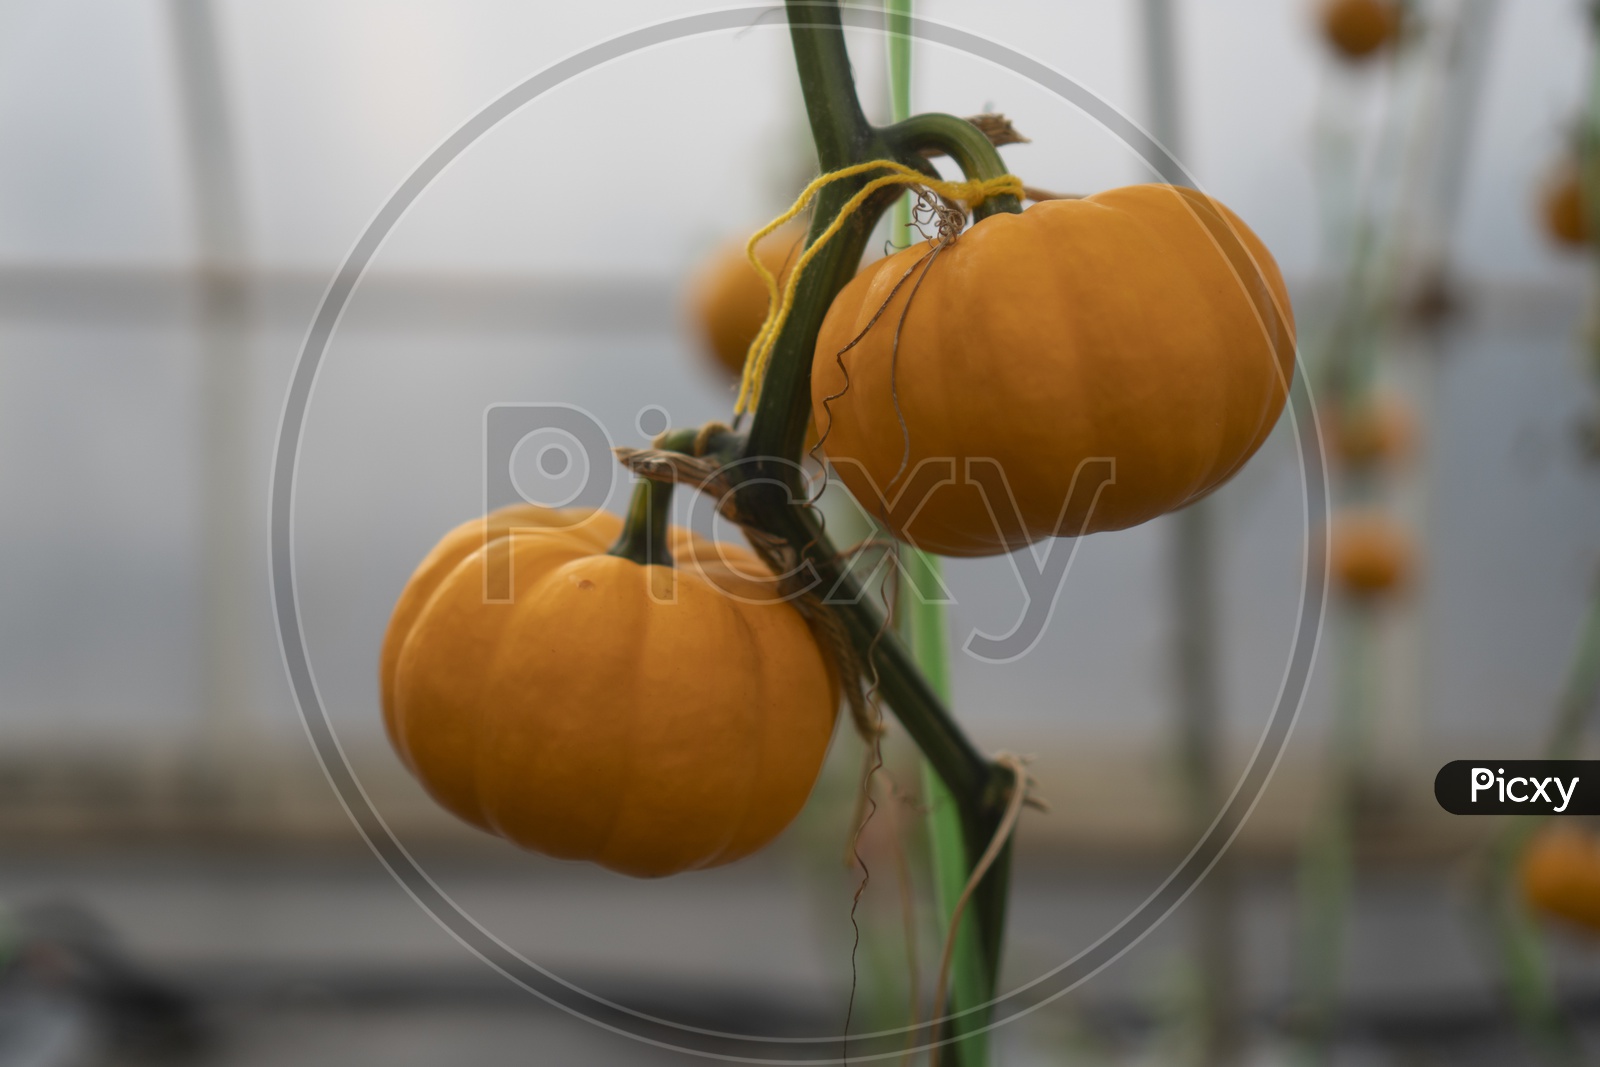 Pumpkins growing in Greenhouse Farm at Thailand